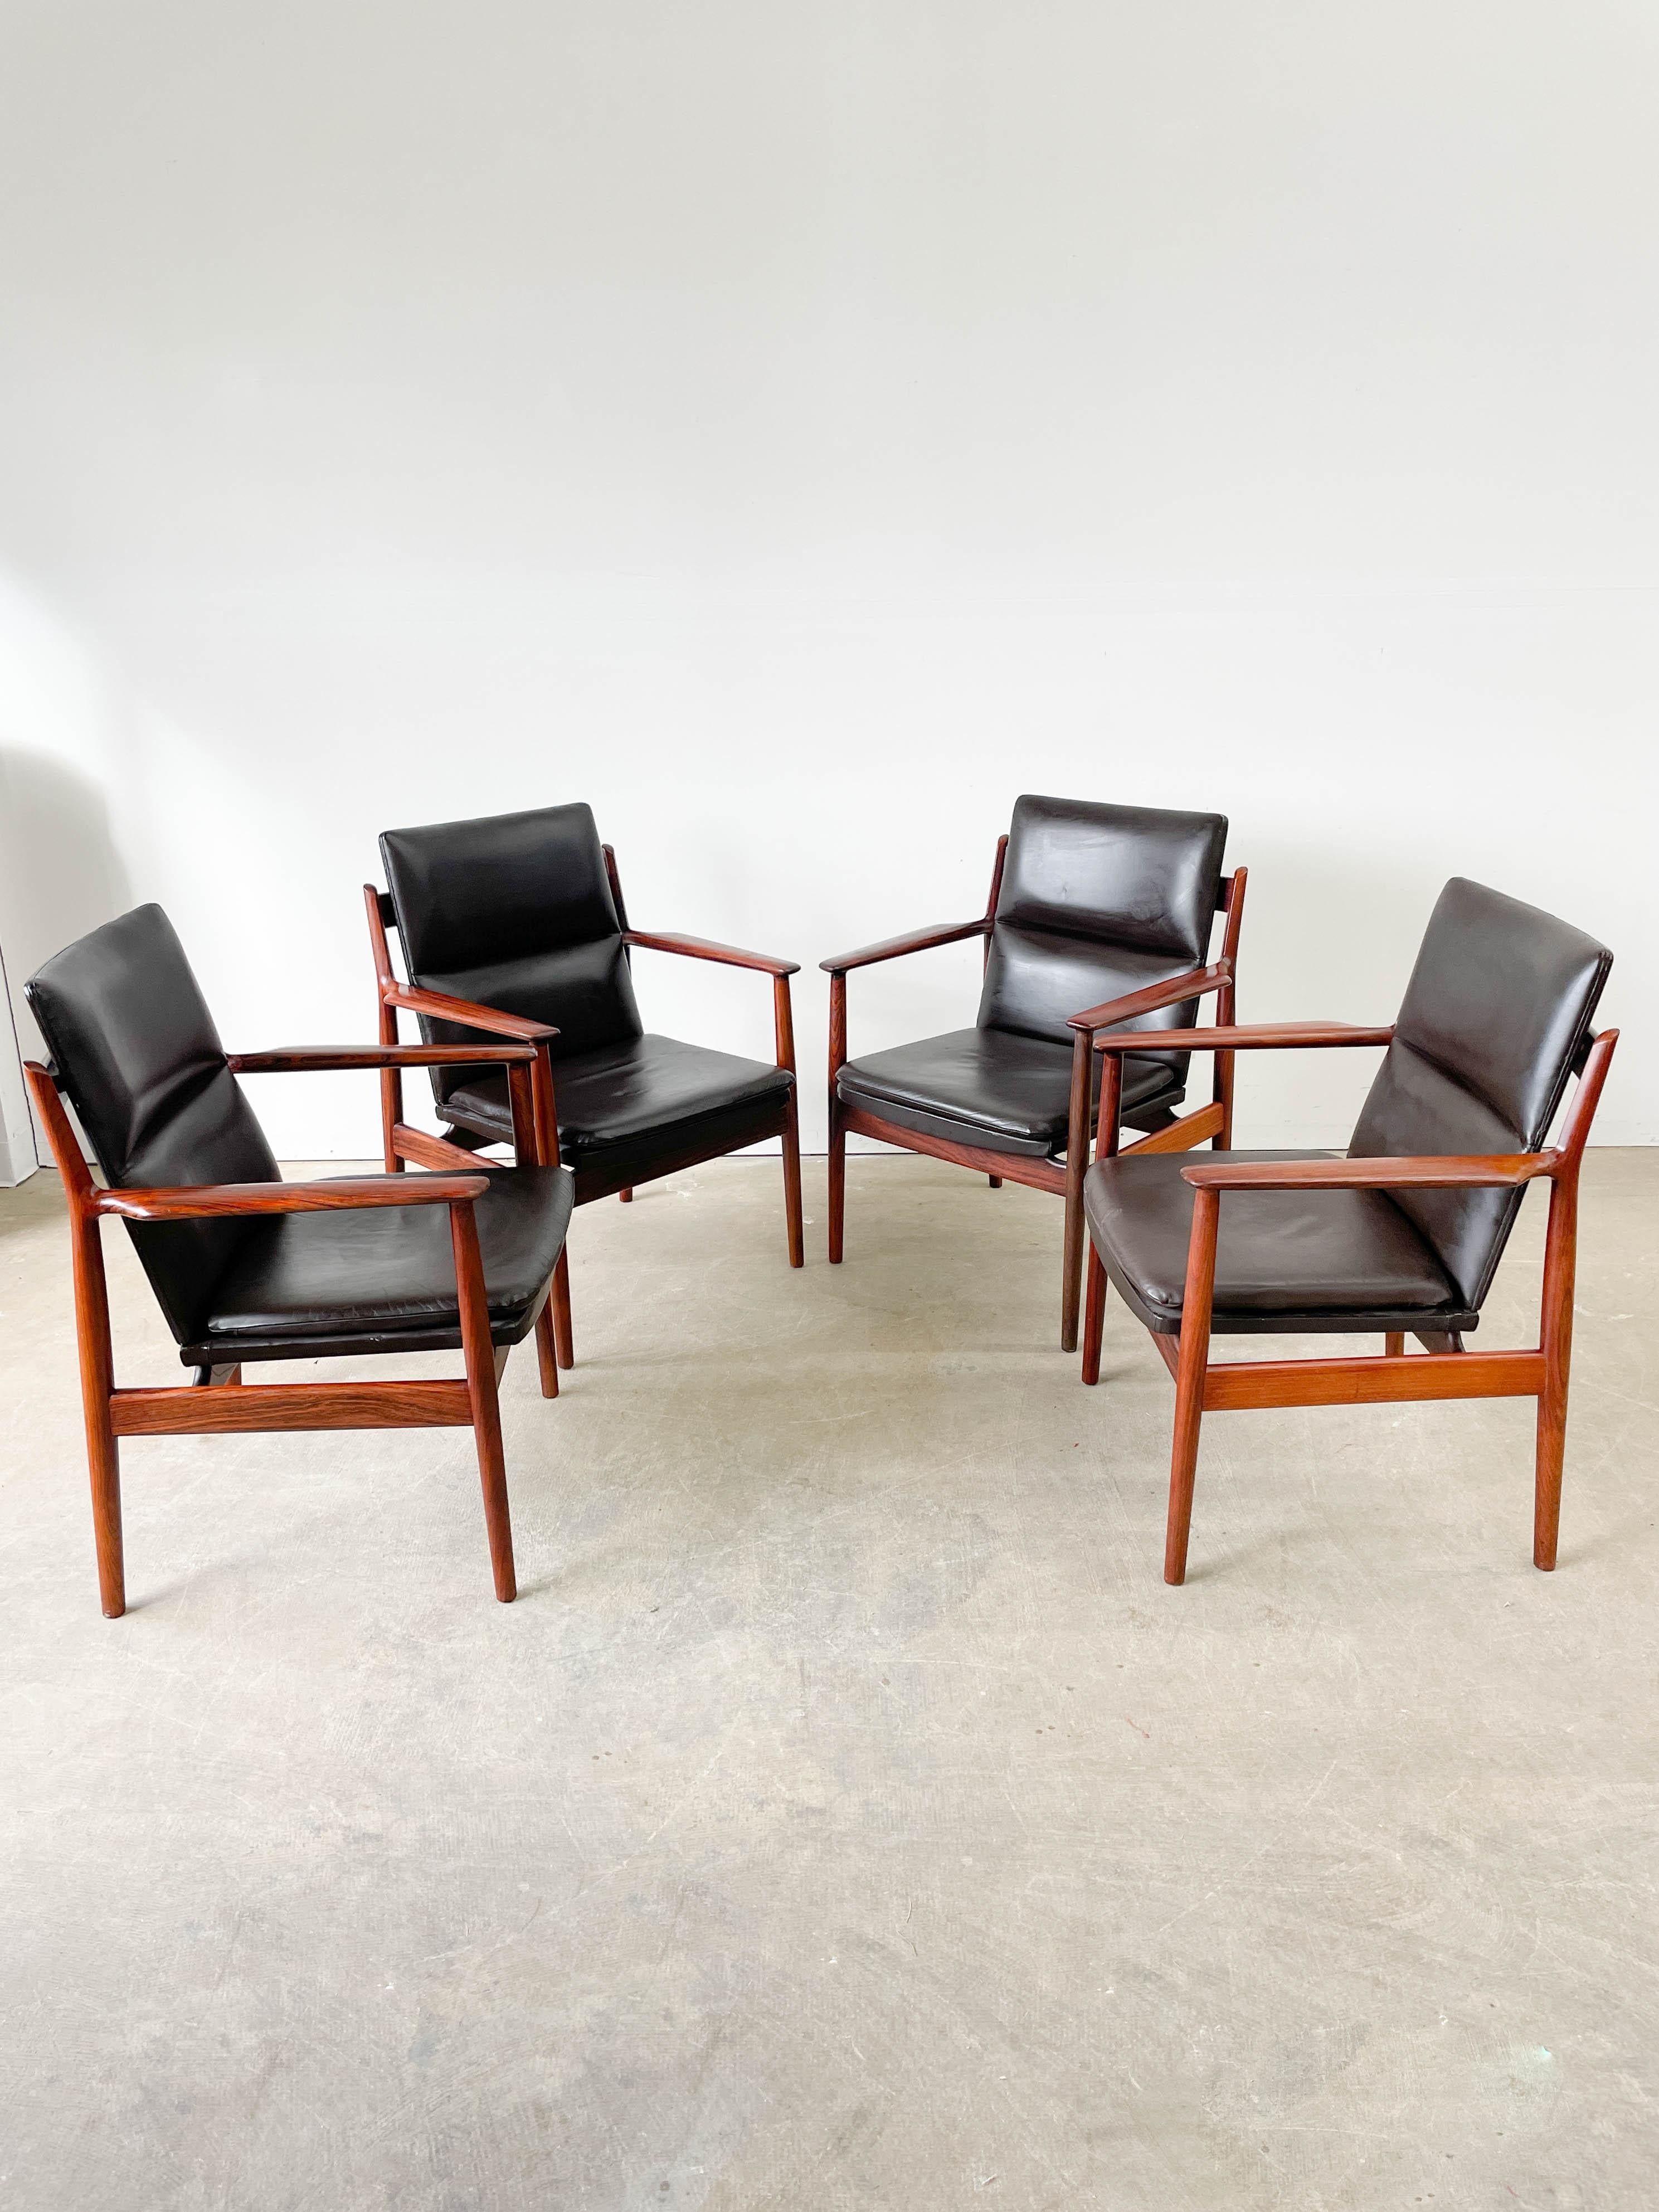 Beautifuly sculpted rosewood frame armchairs designed by Arne Vodder and made by Sibast Mobler in the 1960s. Excellent comofrt with ample armrests and built in lower back support. Solid Brazilian Rosewood frames have exquisite grain and the dark